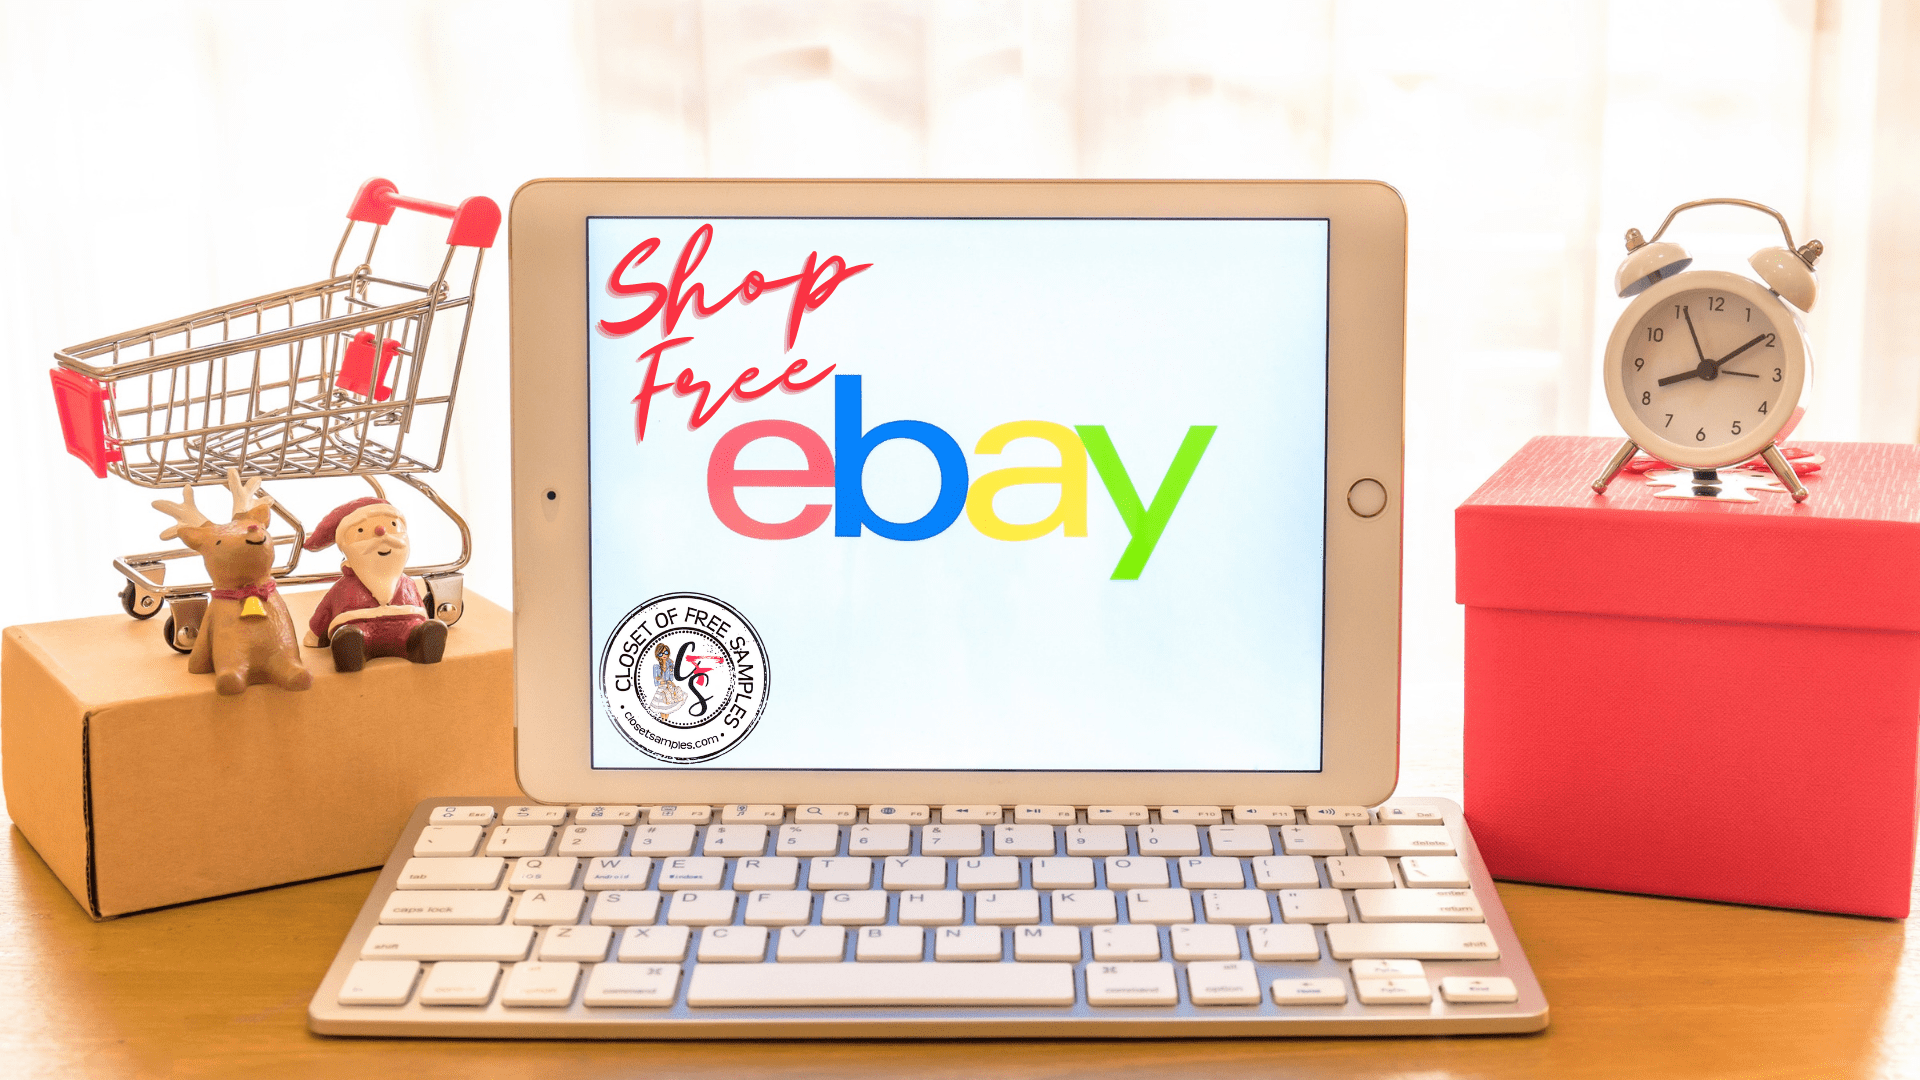 How to Get FREE Stuff on eBay